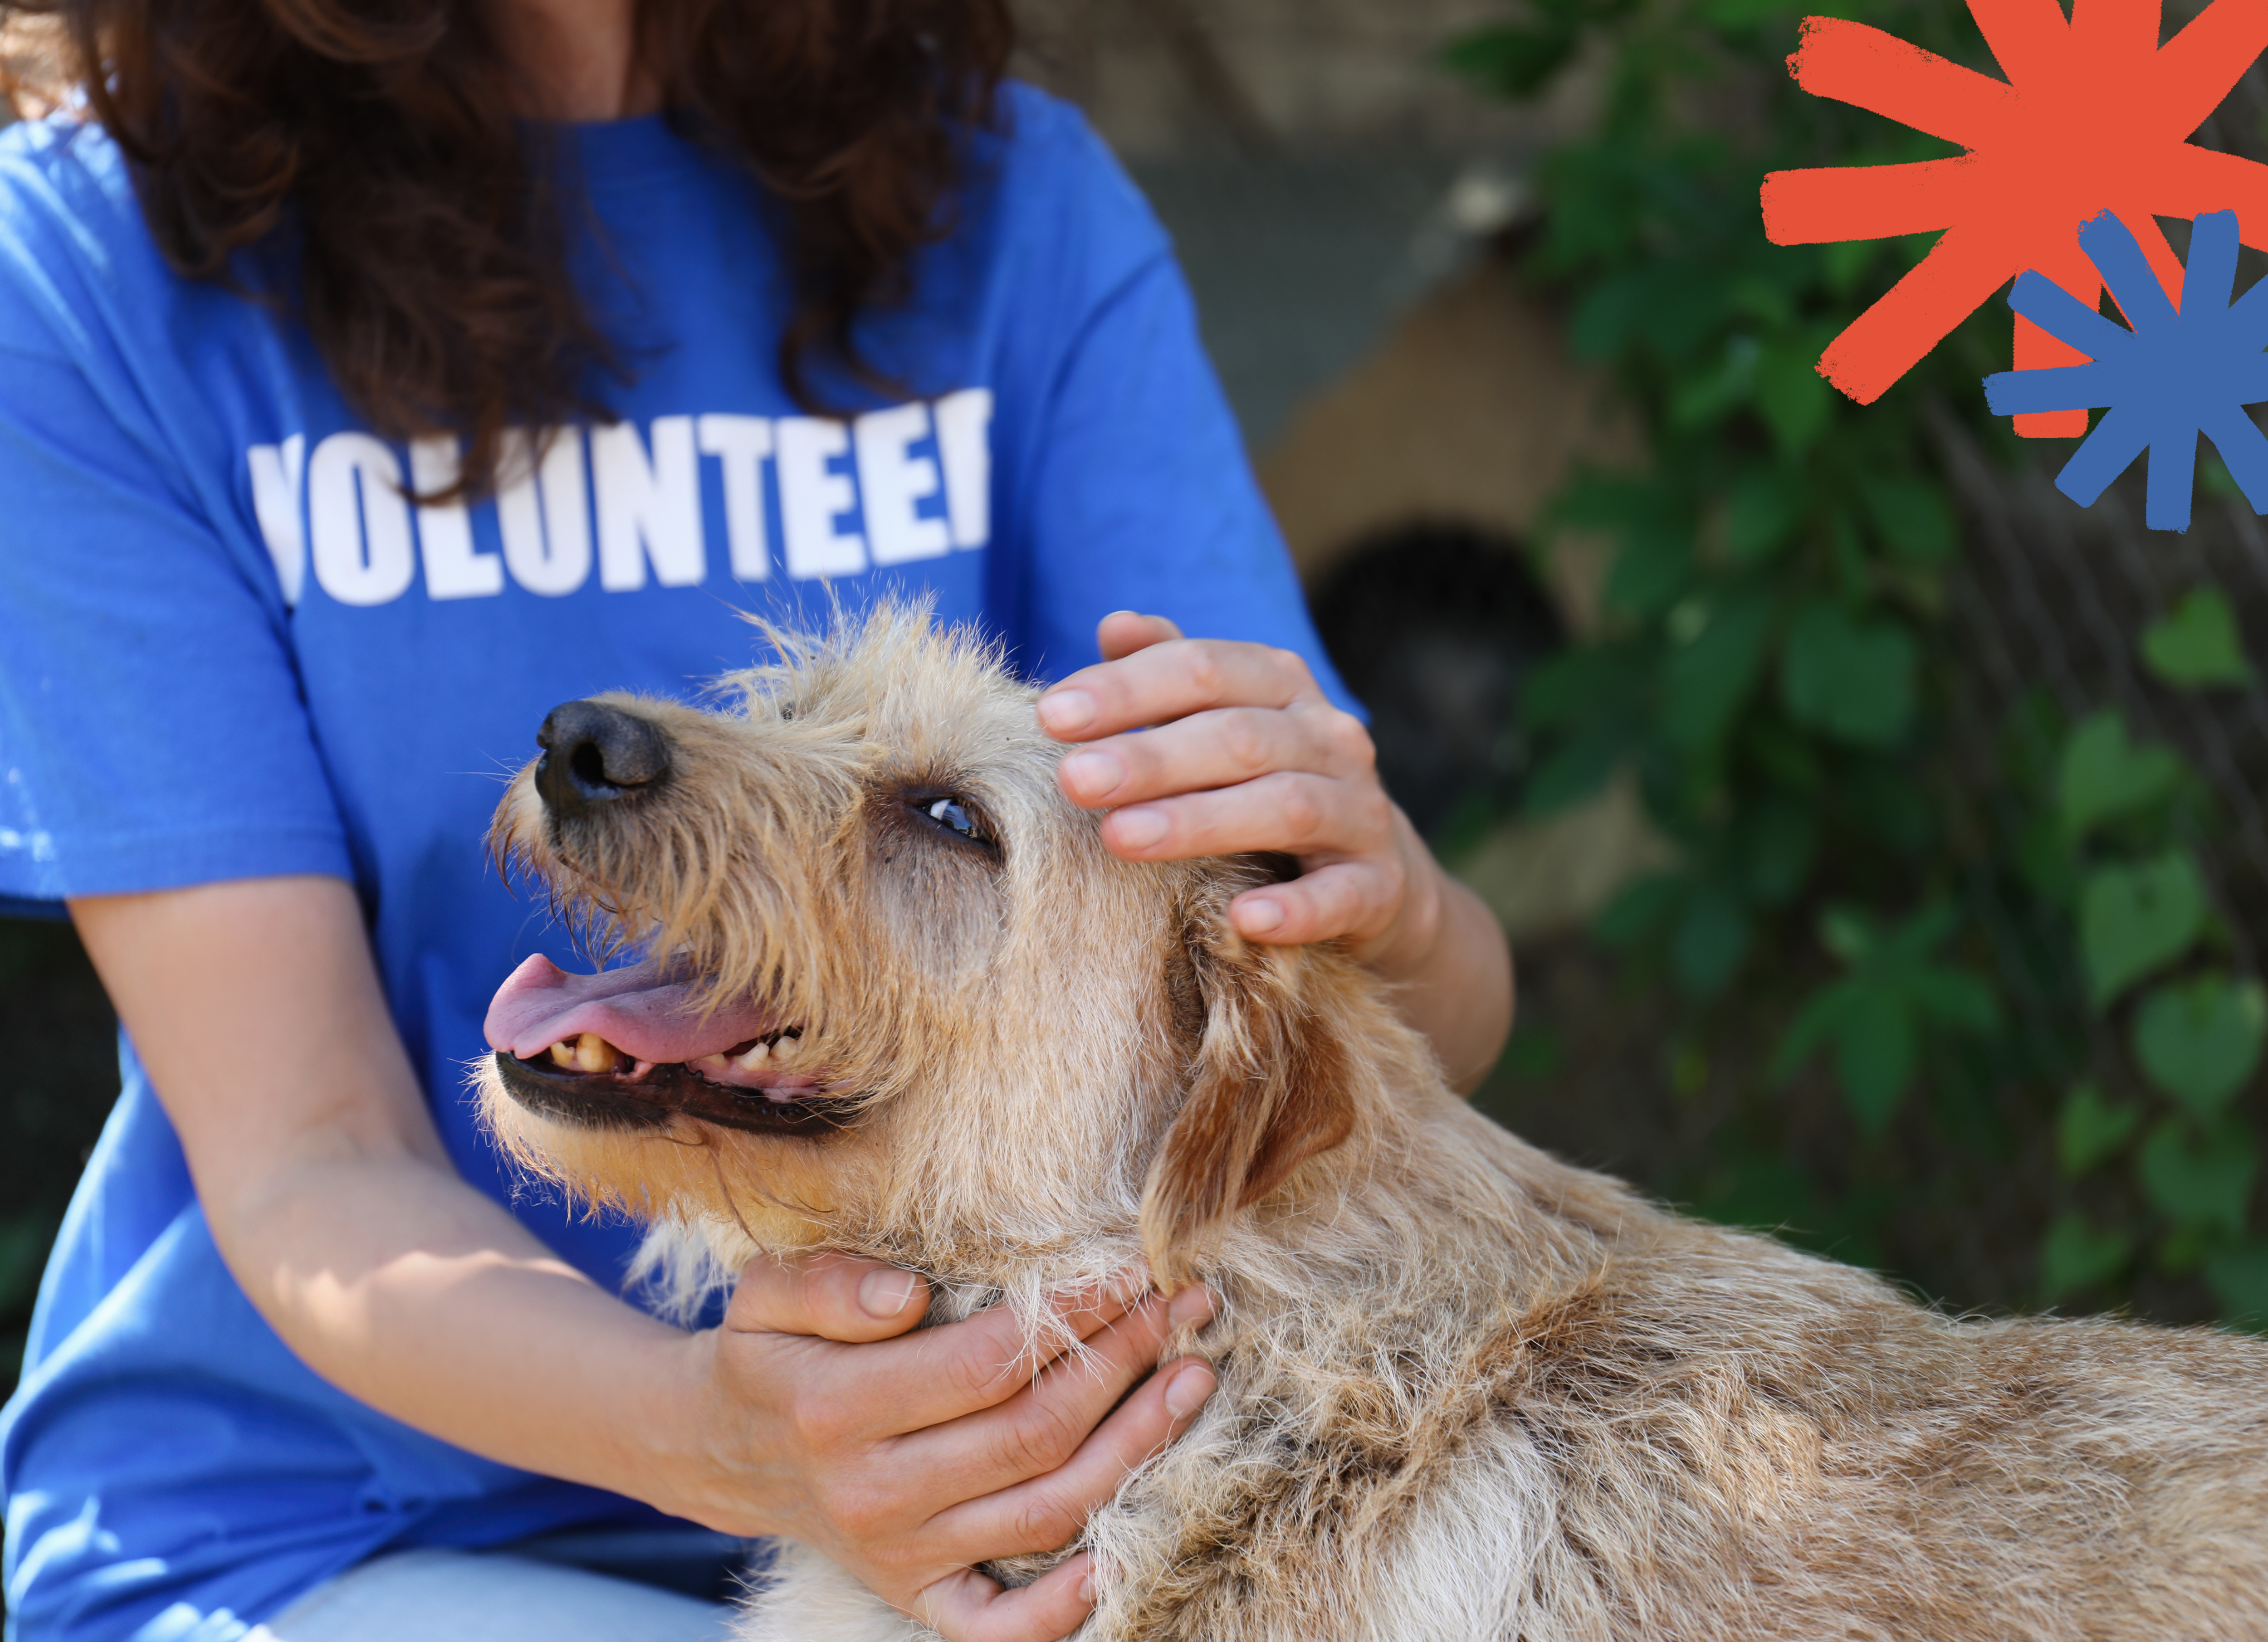 Tan shaggy dog with its head being pet by a woman wearing a bright blue volunteer shirt